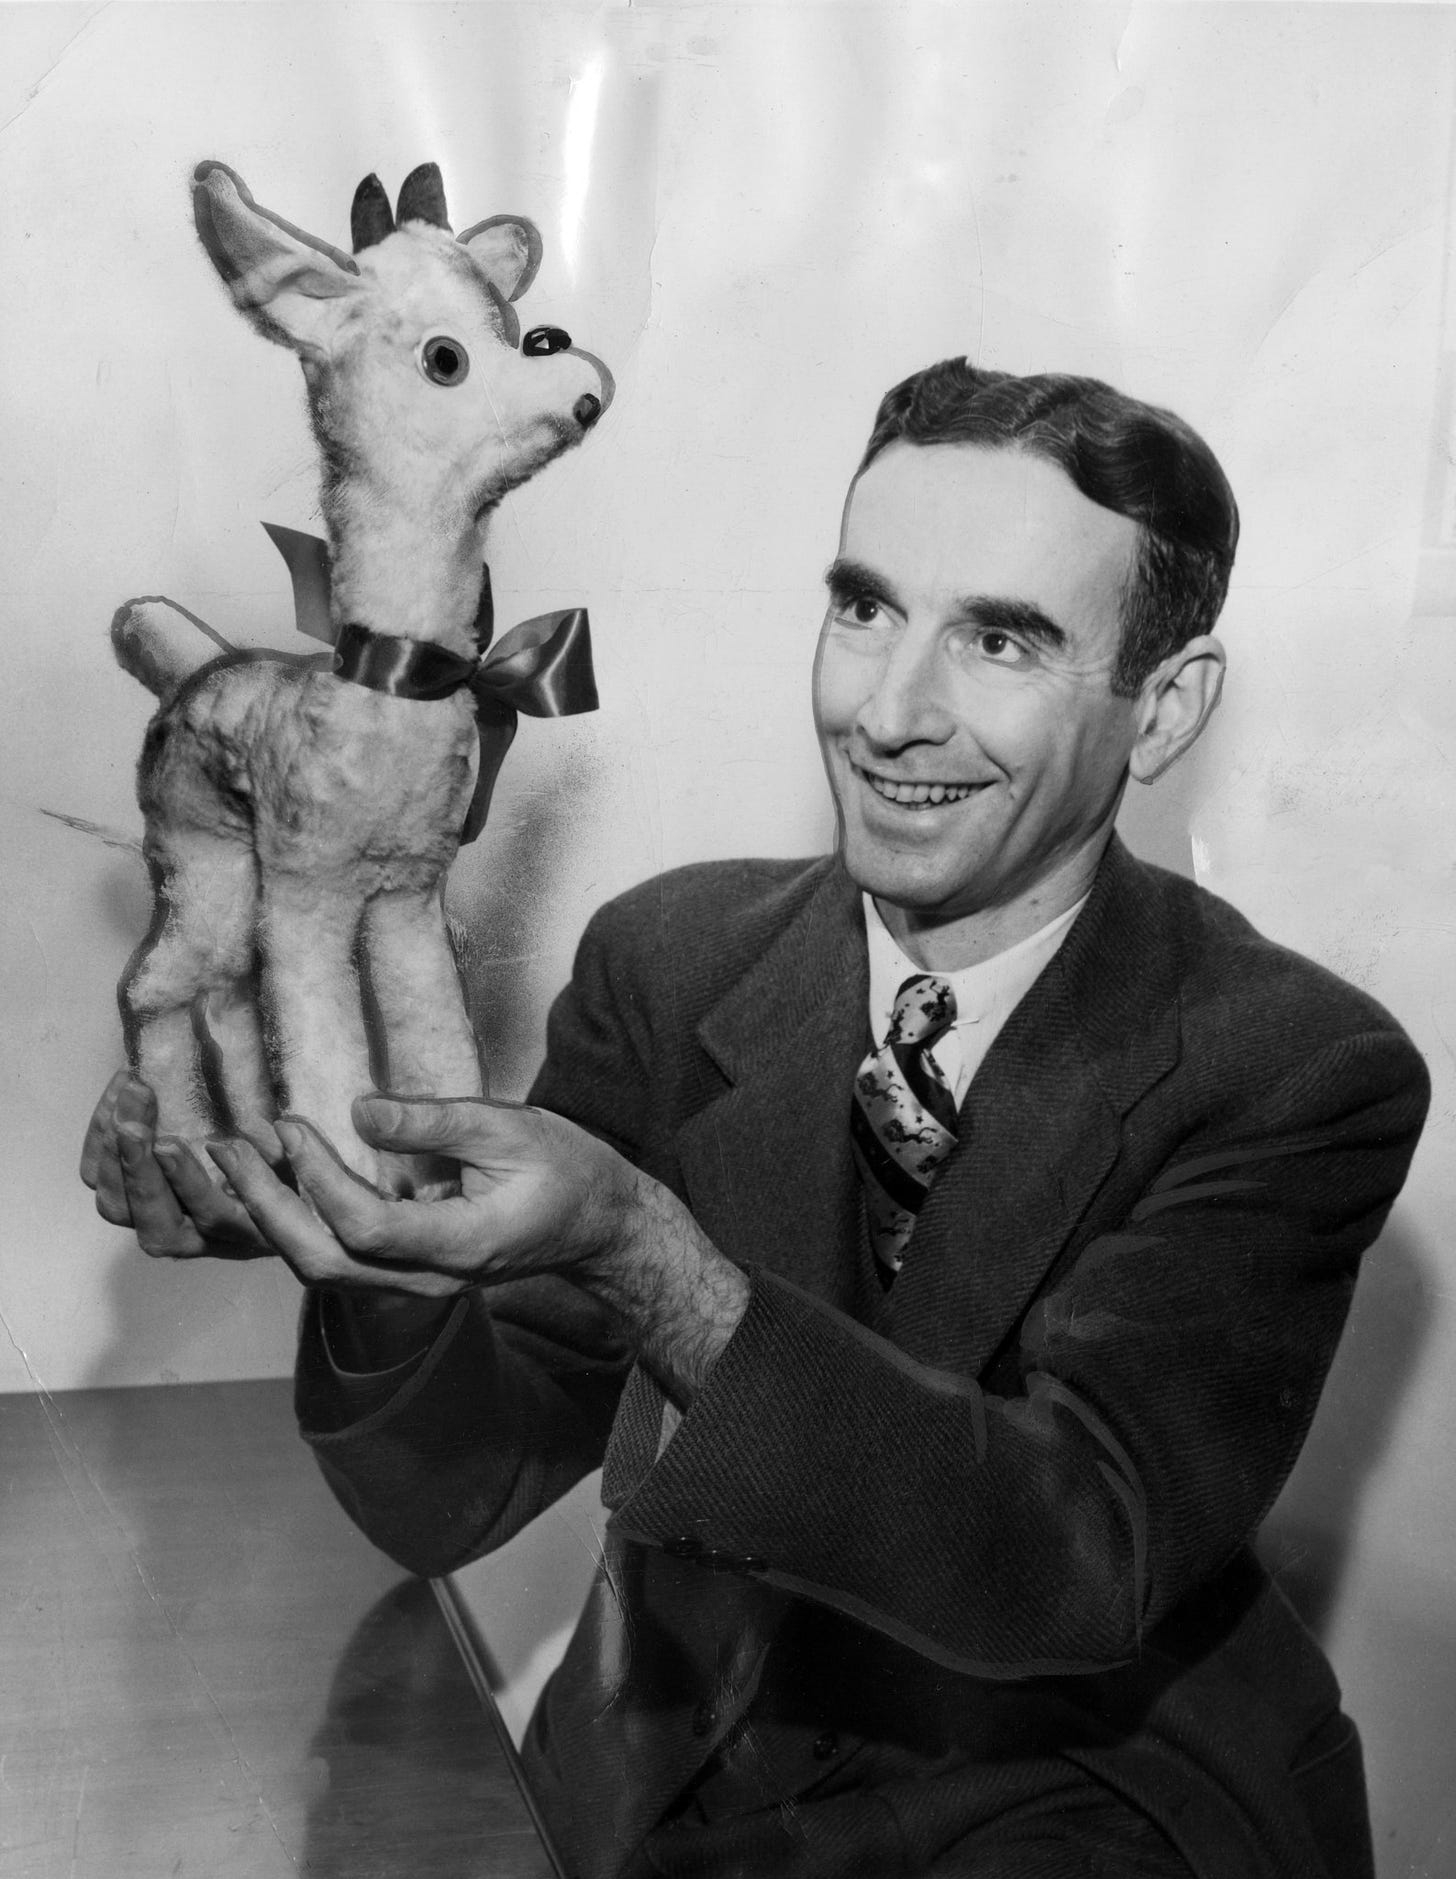 Robert L. May, the creator of Rudolph the Red-Nosed Reindeer